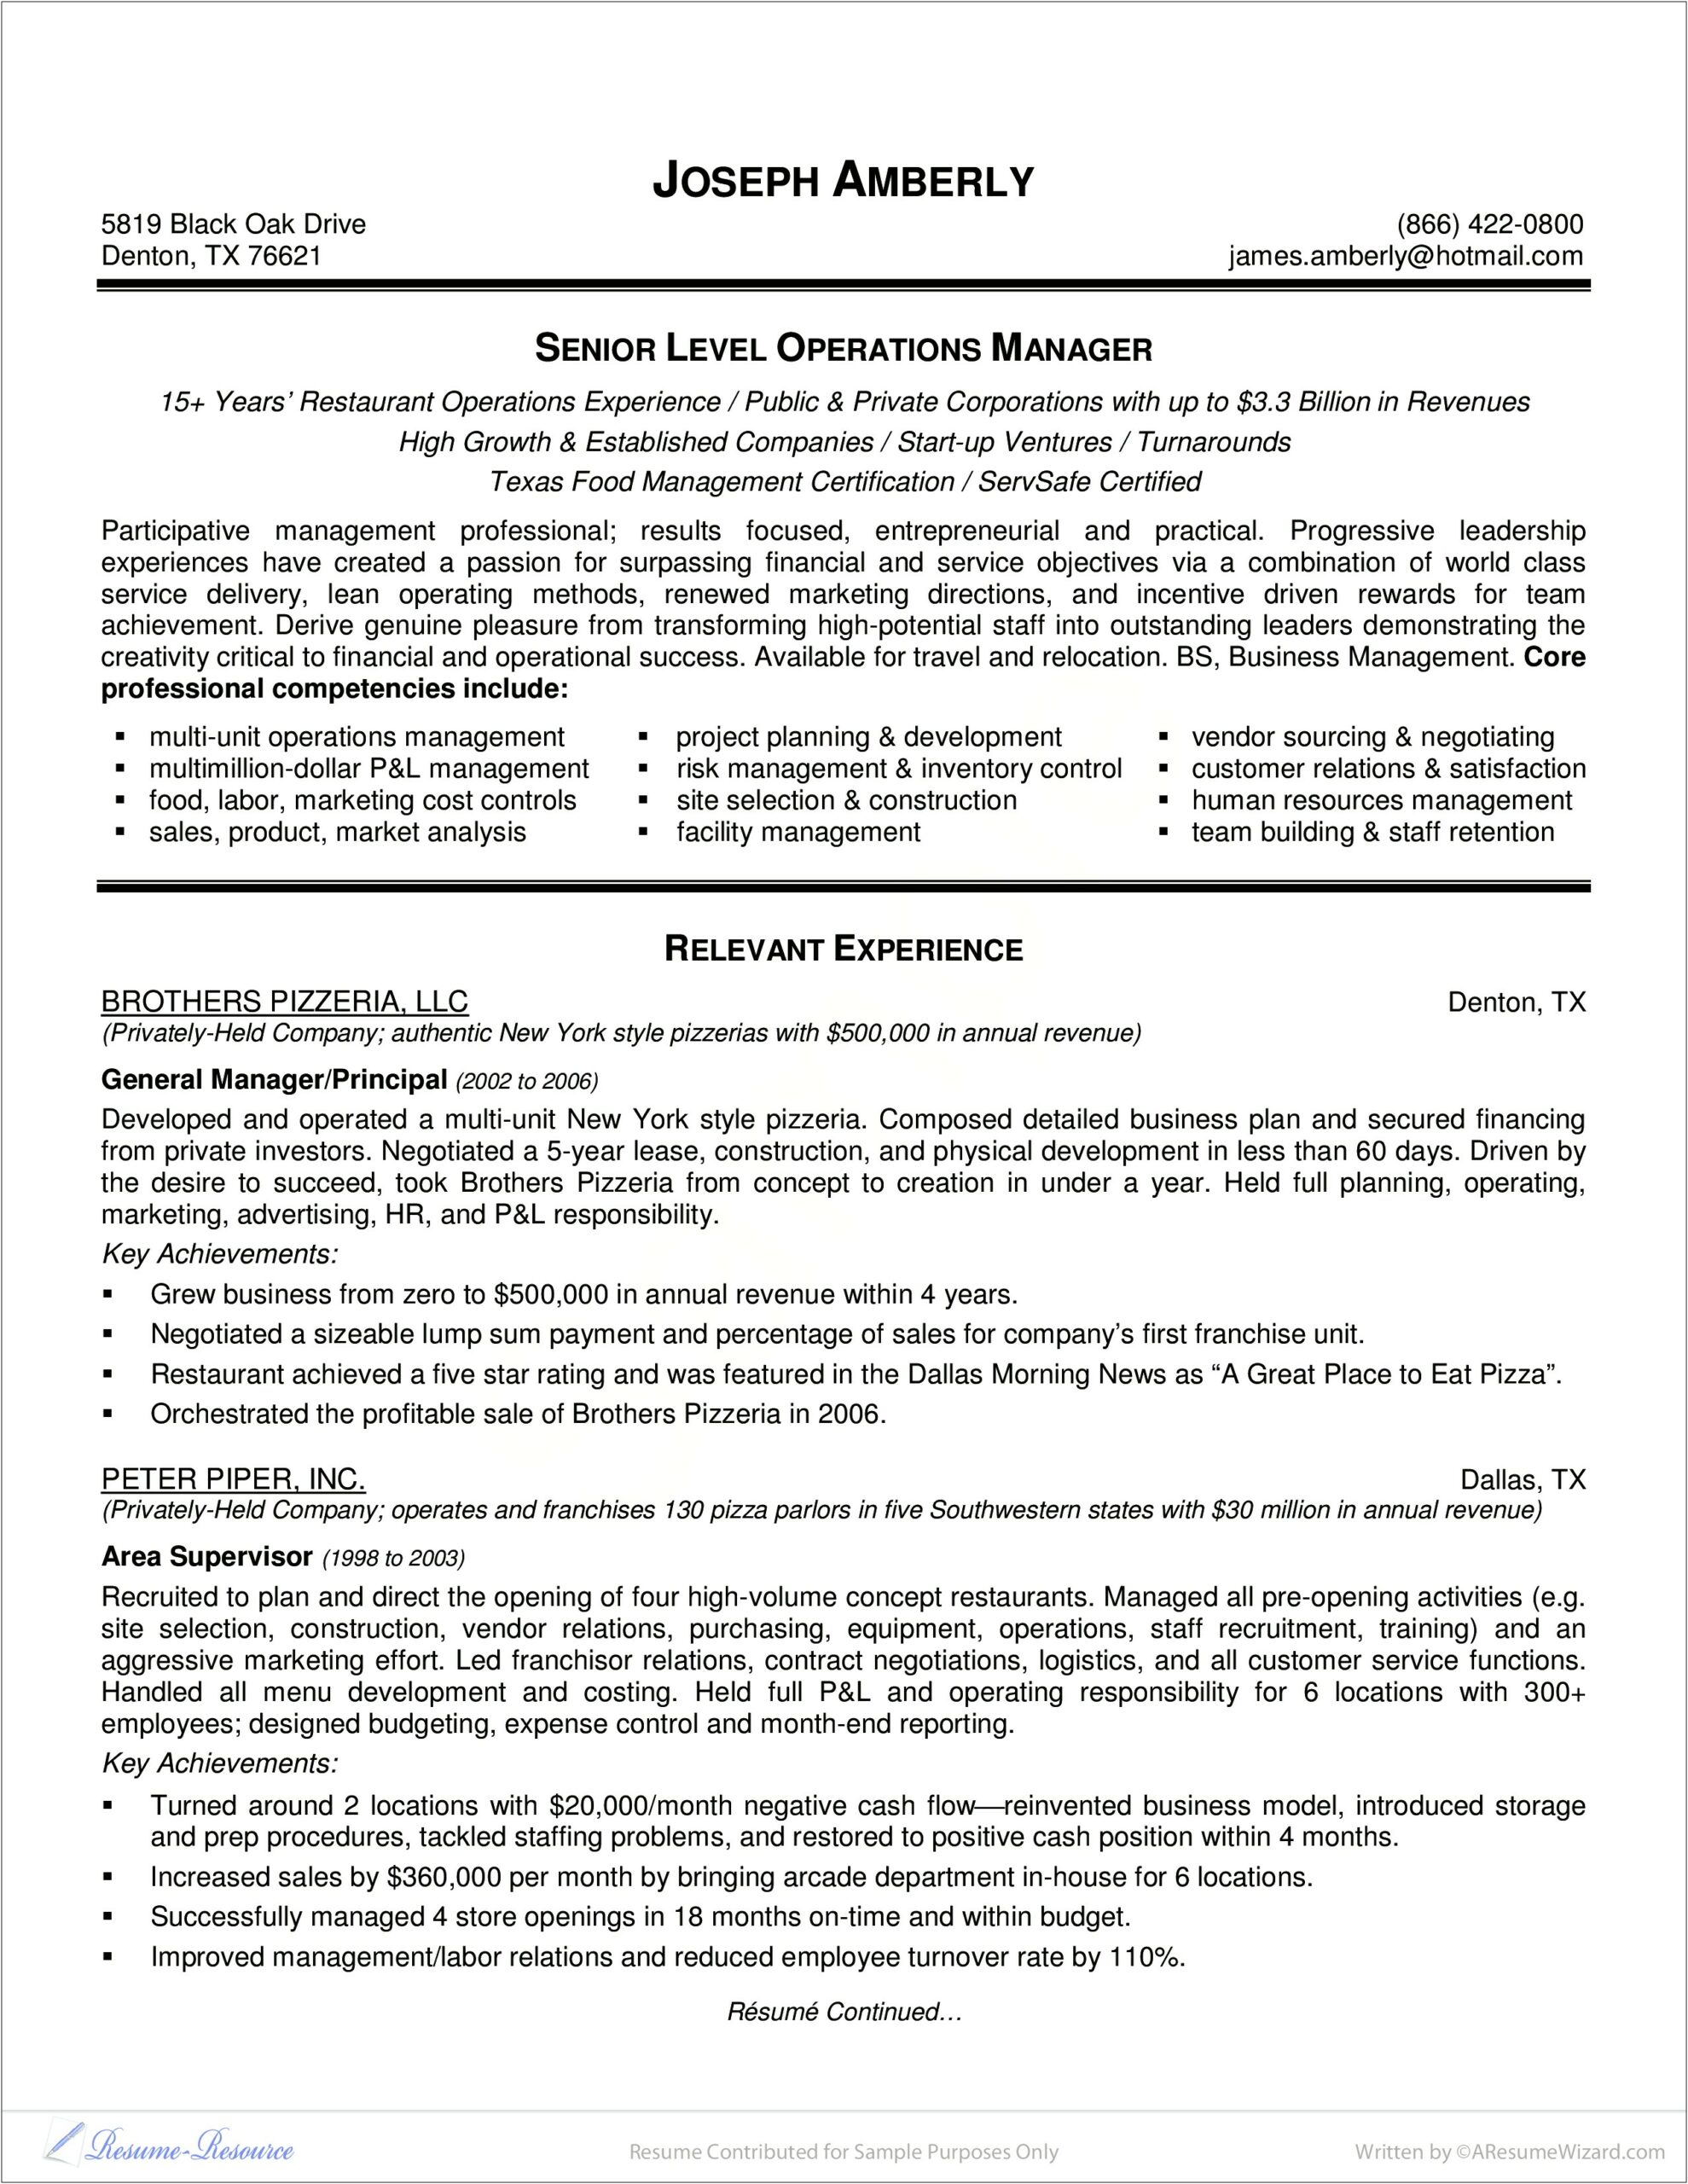 Environmental Services Supervisor Resume Examples